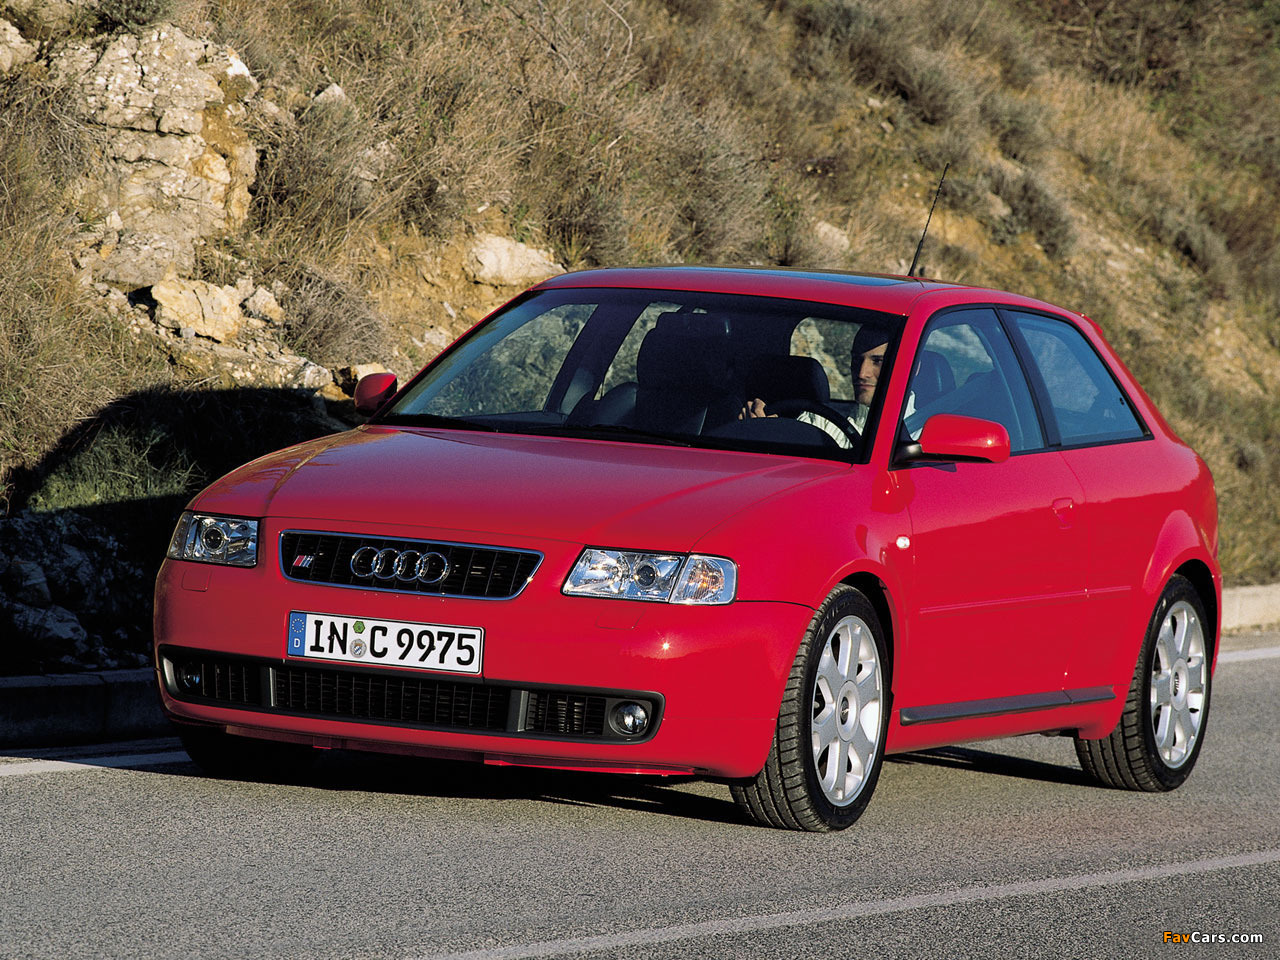 Pictures of Audi S3 (8L) 1999-2001 (1280x960)